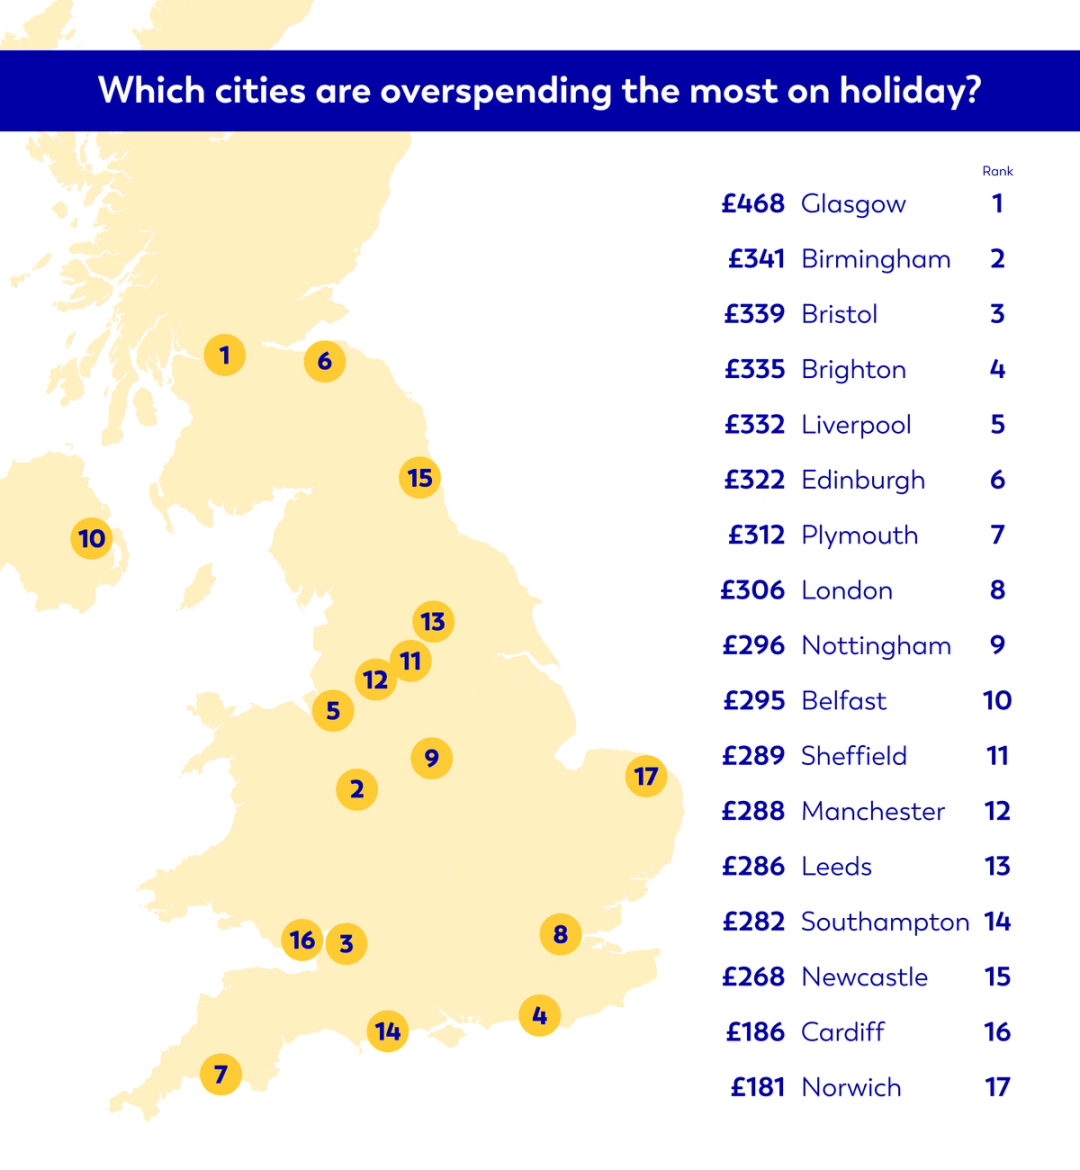 Map of the UK showing which cities in the UK overspend the most and by how much when on holiday